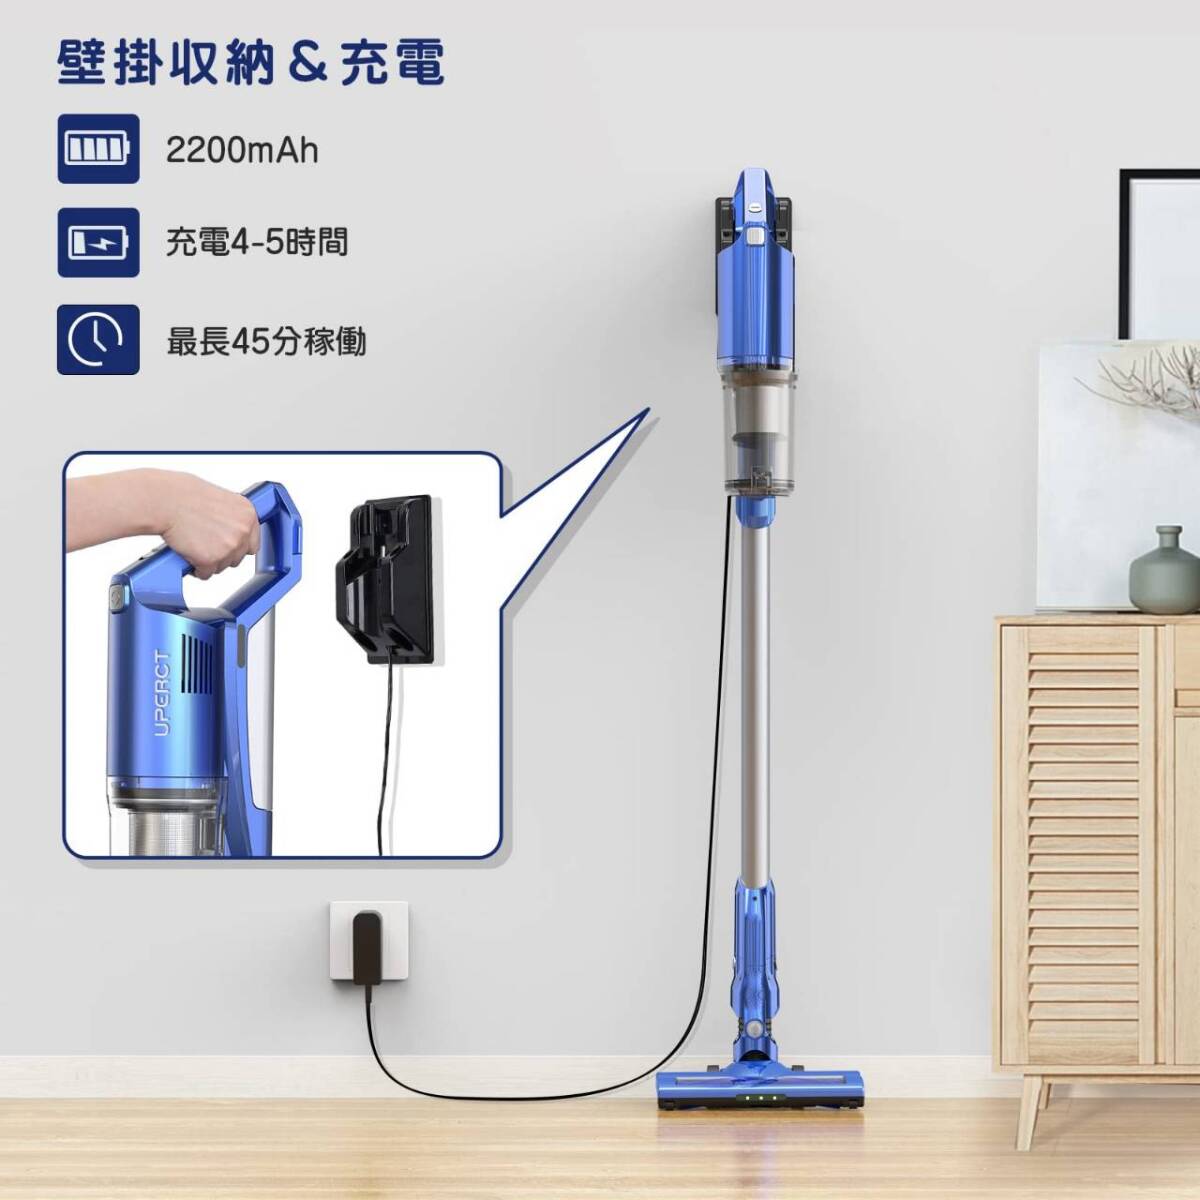  ornament charge & storage possible 2WAY cordless vacuum cleaner 